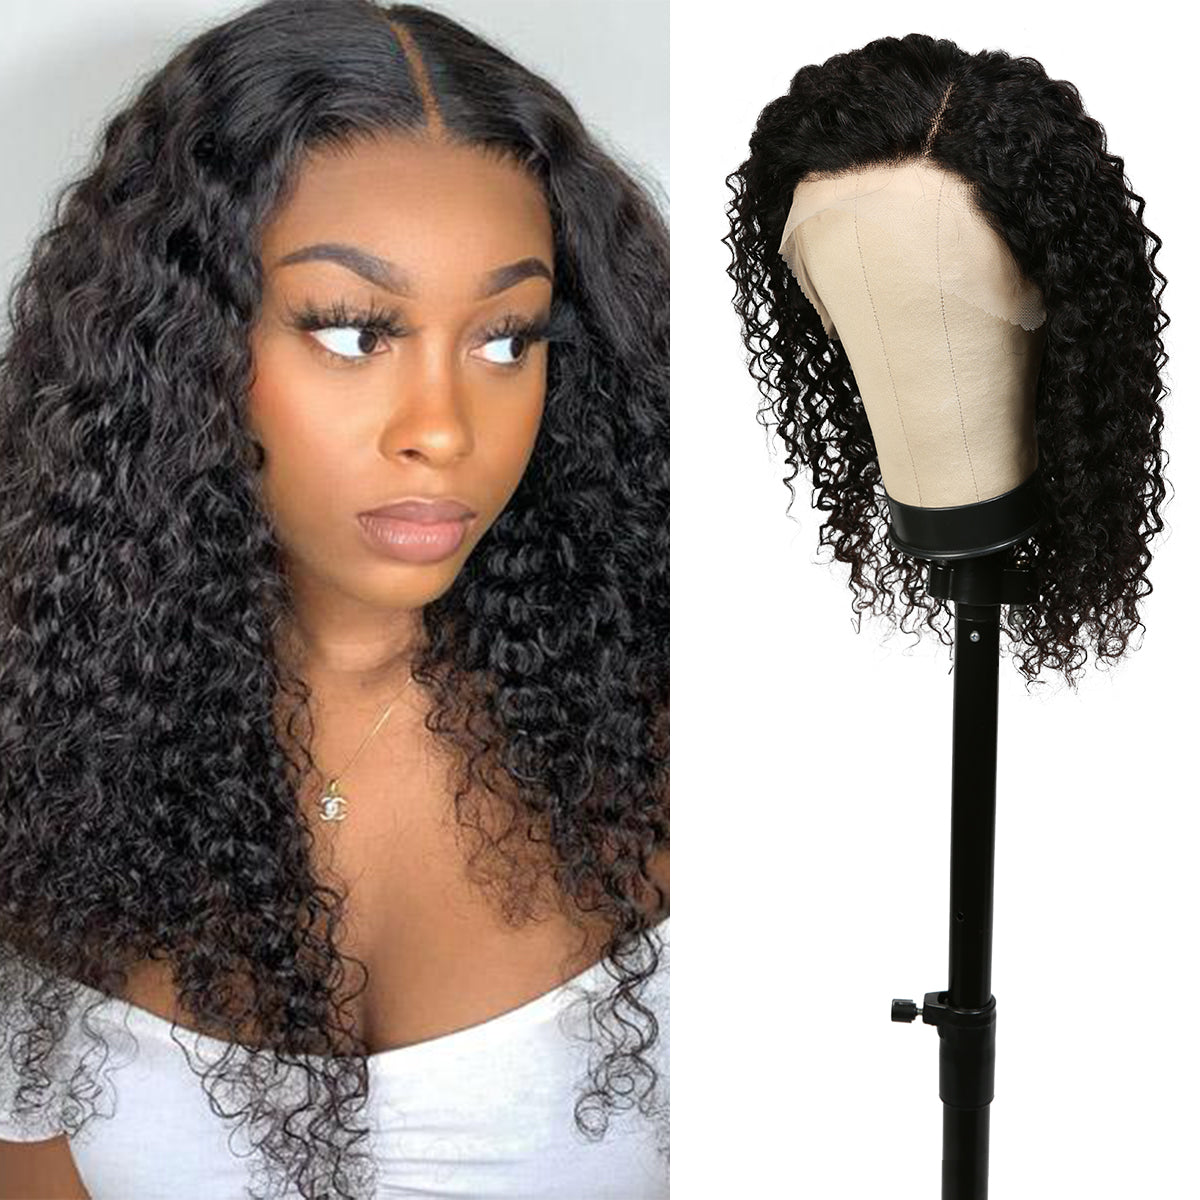 Human Hair, Lace Wig, 13x4, Frontal, Free Part, Bohemian, Jerry, 20"